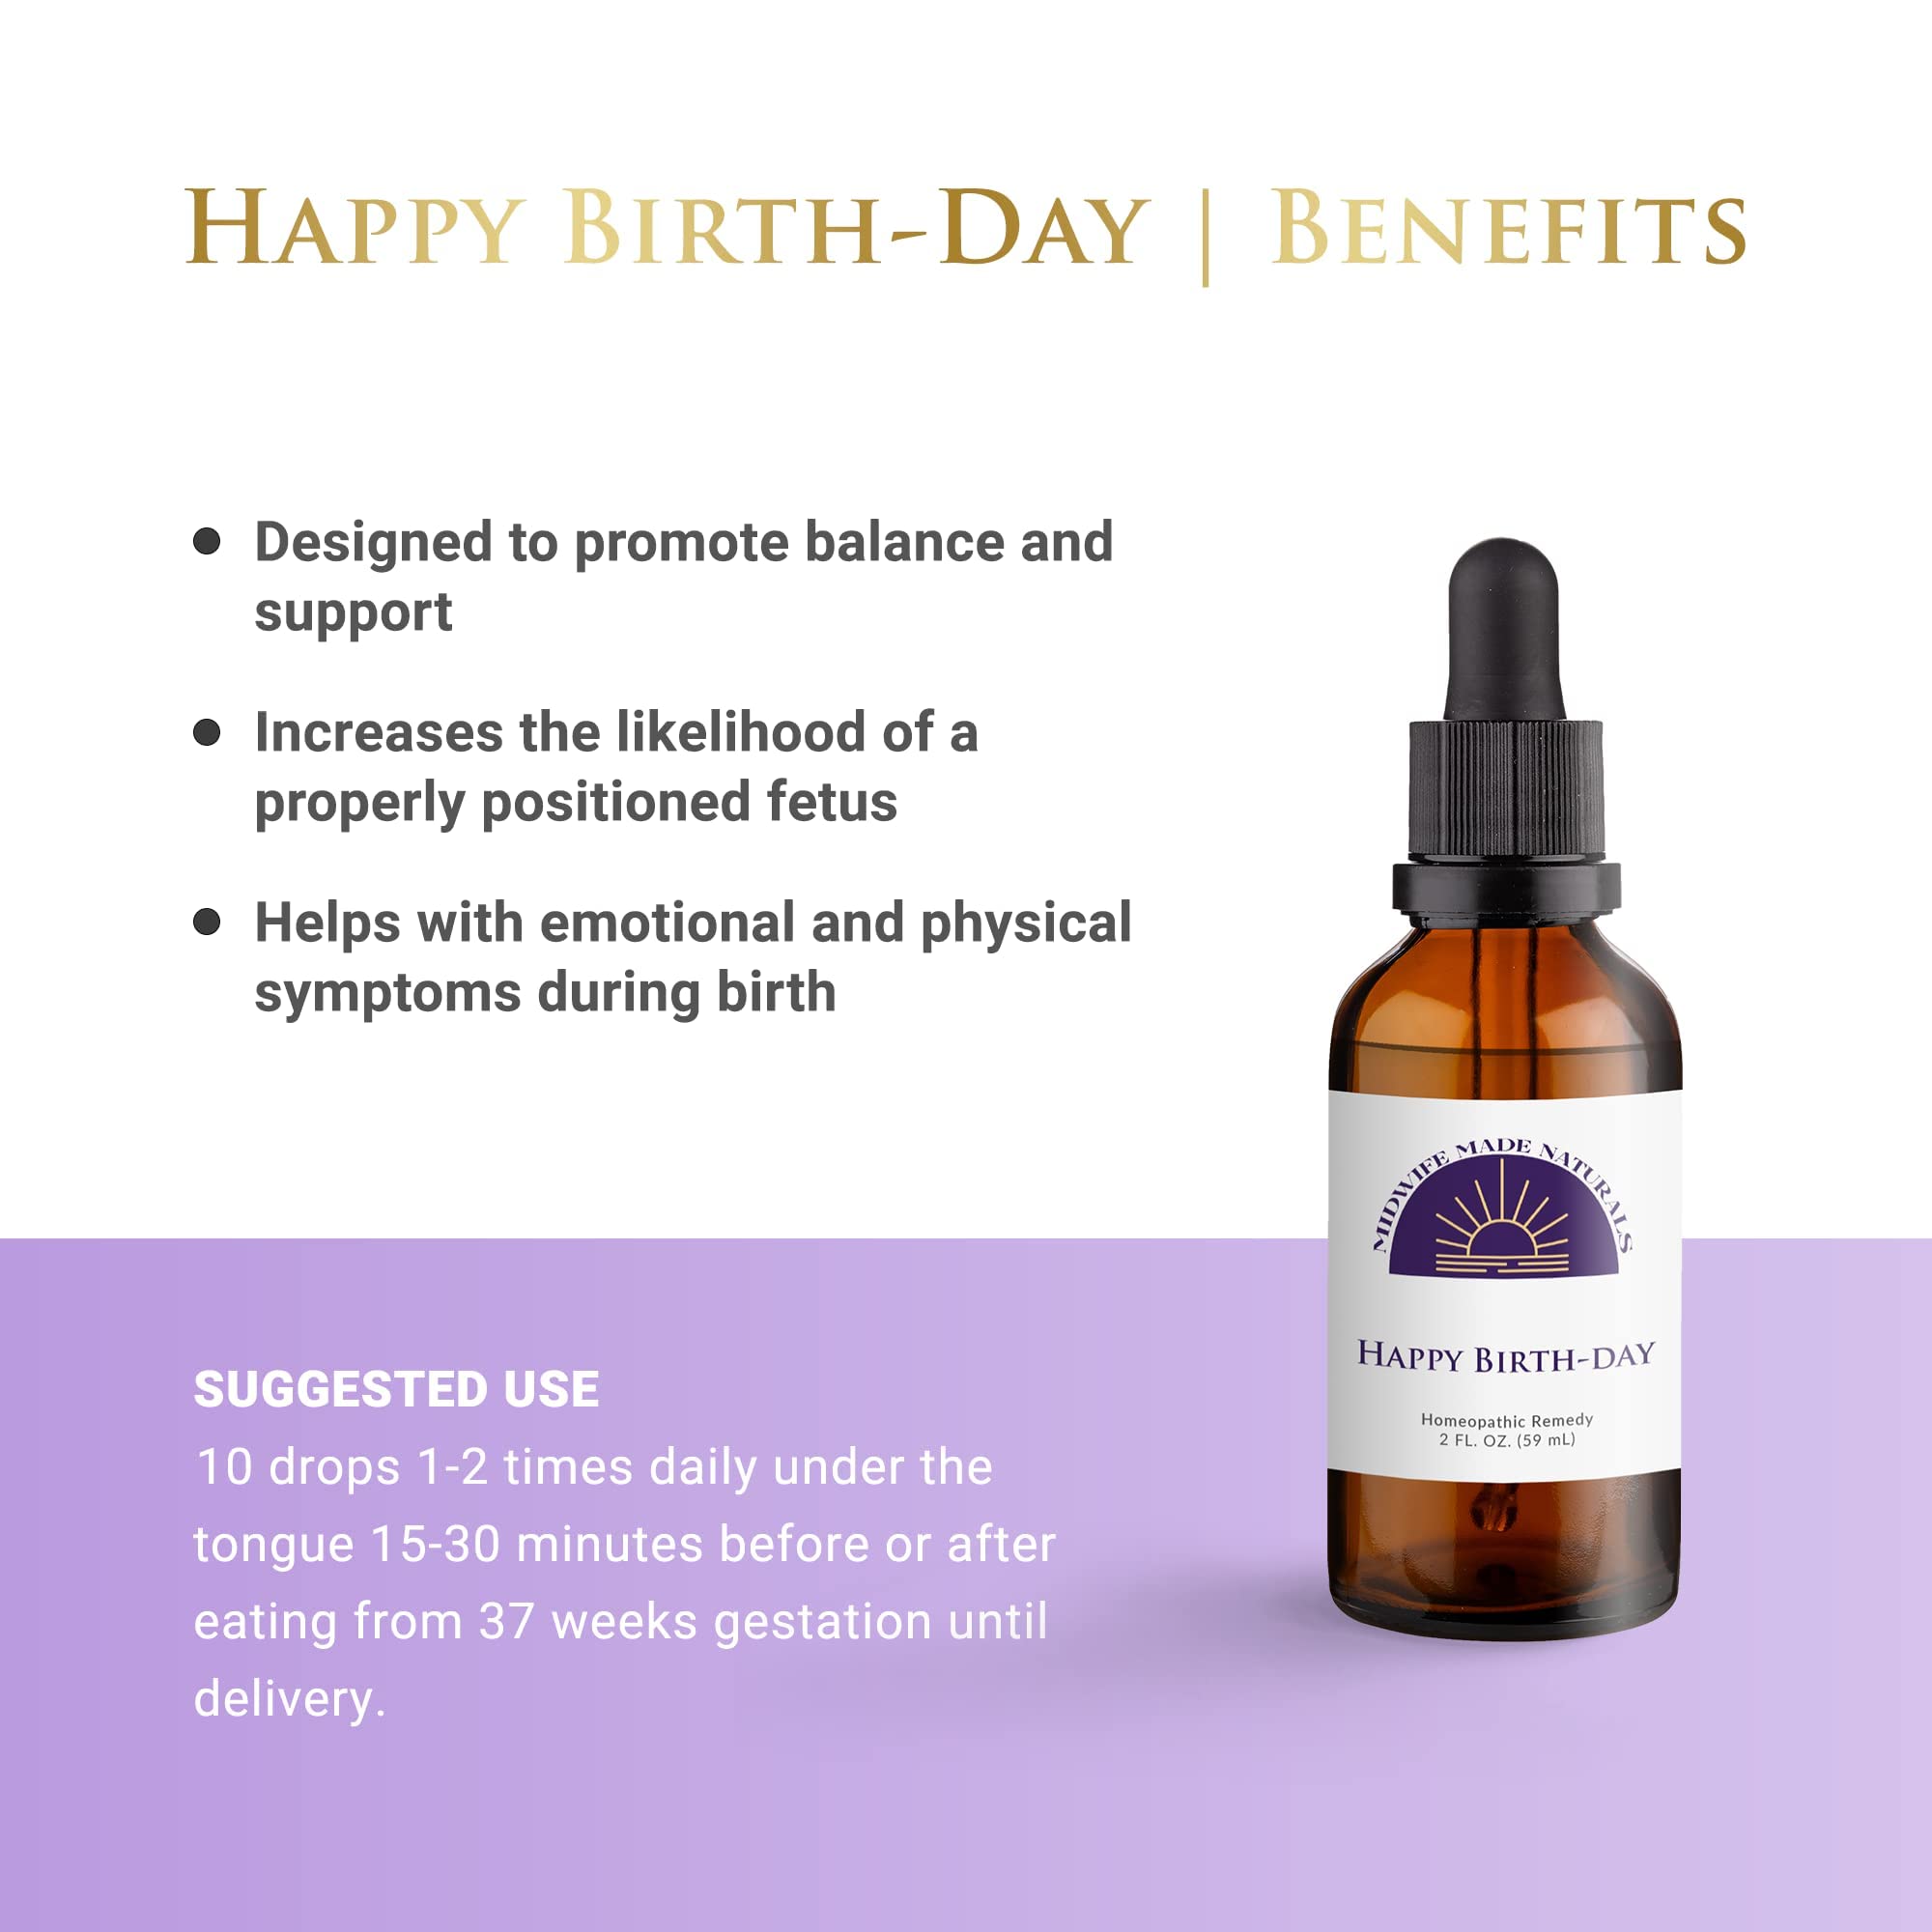 Happy Baby Virtual Bundle -Midwife Made Naturals- Happy Birth-Day, After Birth-Bliss, & Milky-Way - Homeopathic Preparations - All Natural Remedy Drops - Homeopathy Kit for Pregnant Women & New Moms